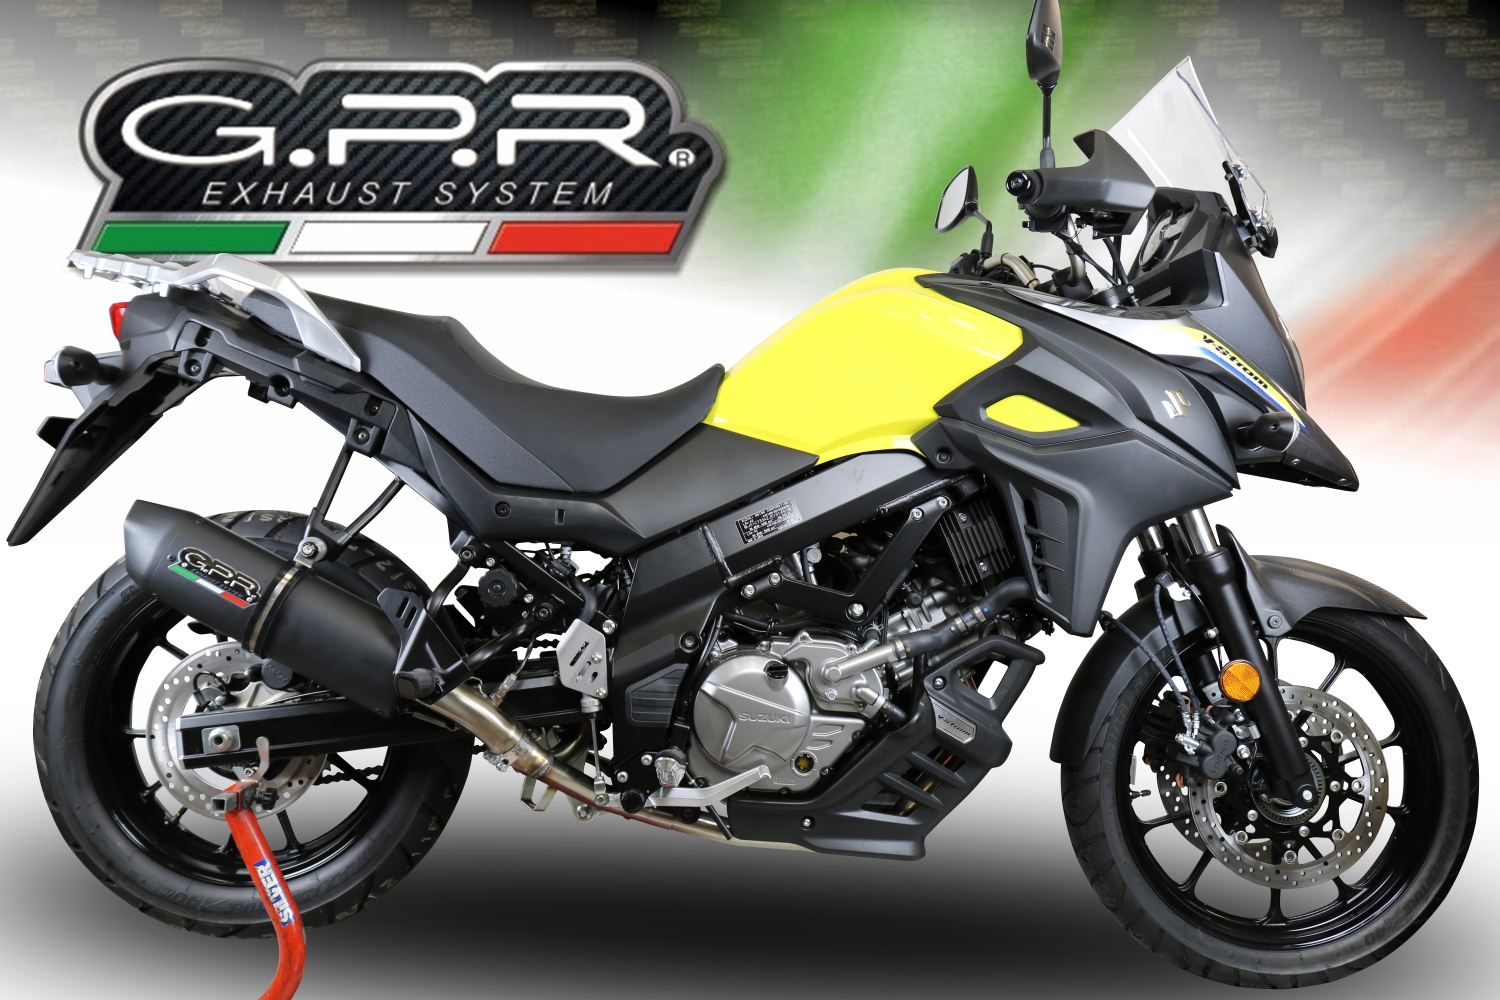 Exhaust system compatible with Suzuki V-Strom DL650 2017-2020, Furore Evo4 Poppy, Homologated legal Mid-full system exhaust, including removable db killer and catalyst 